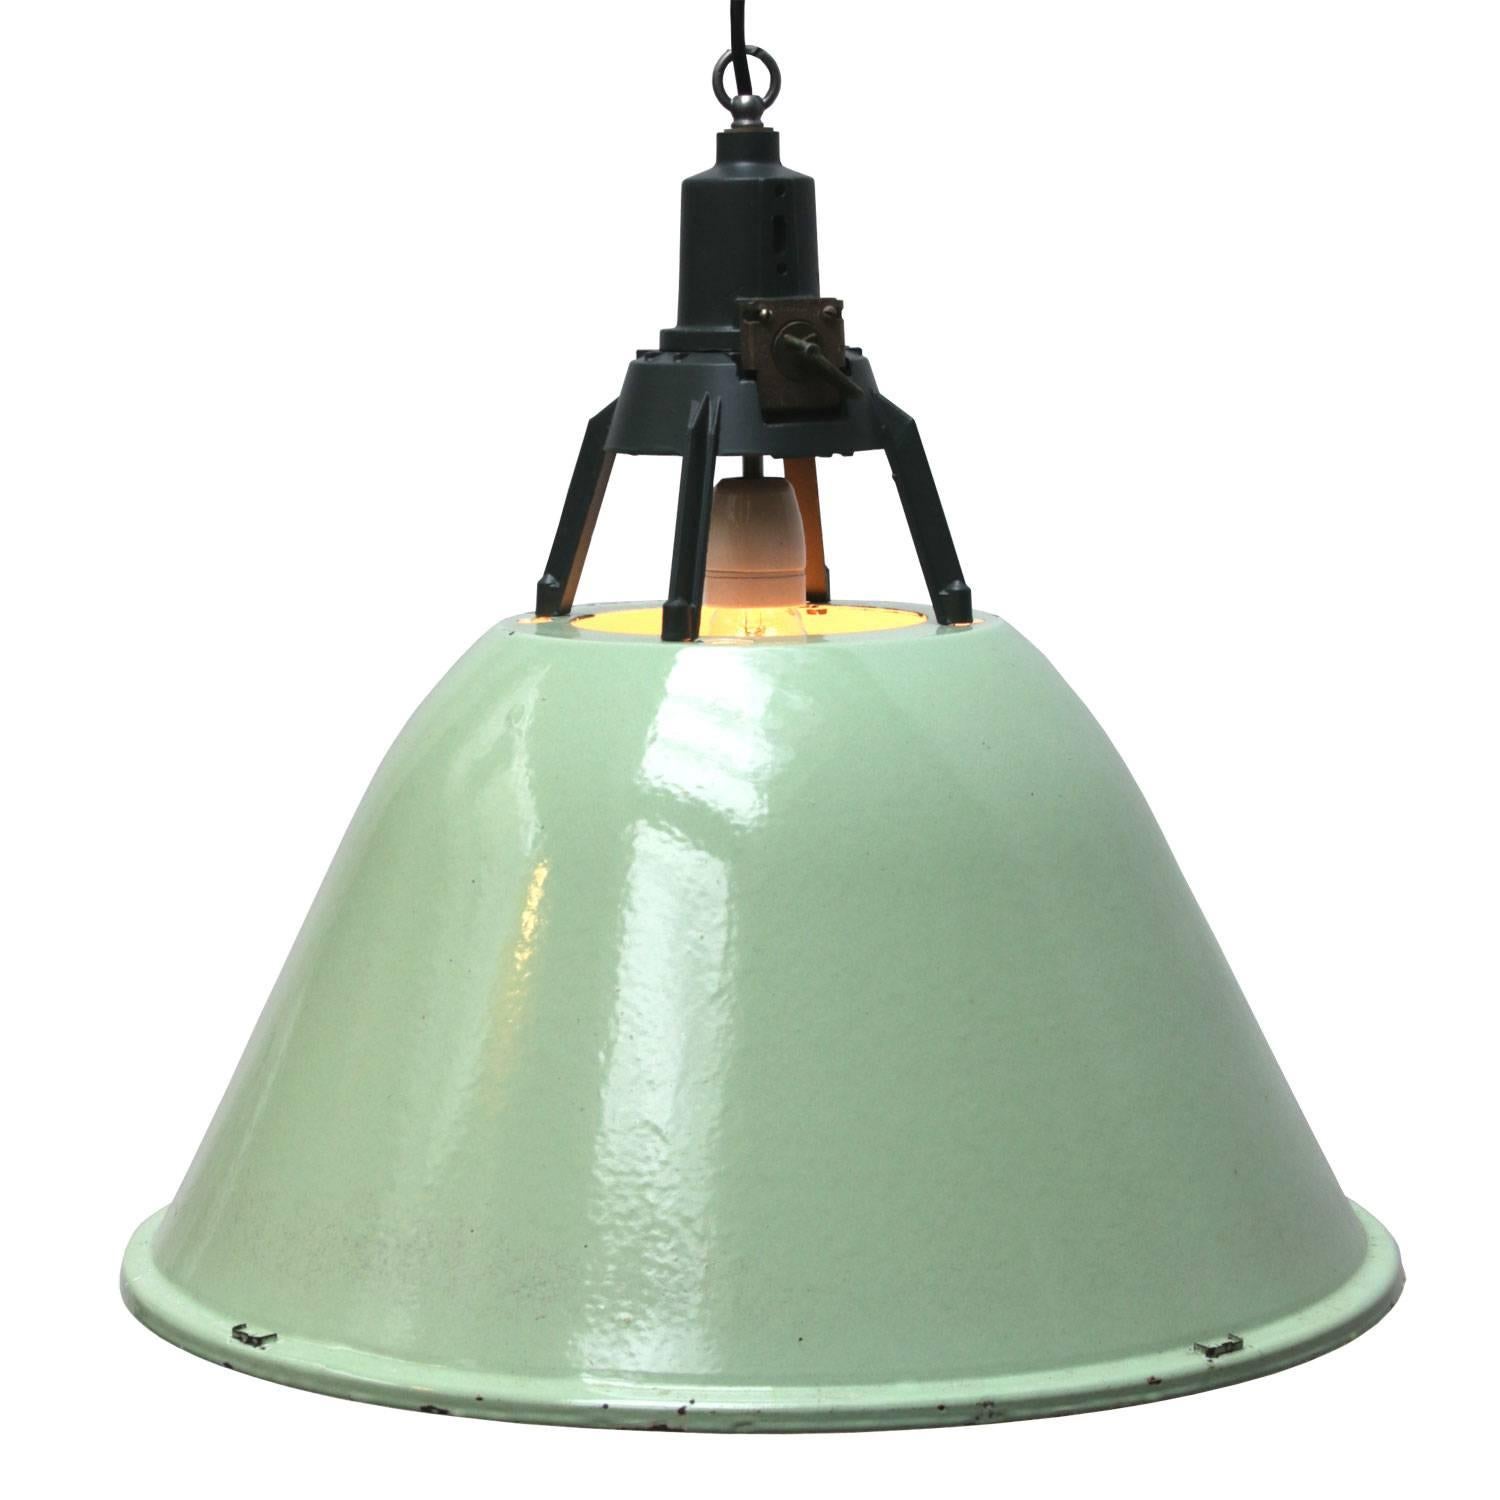 Enamel Industrial pendant. Green enamel shade. White inside.
Dark grey / green cast aluminium top.

Weight: 4.0 kg / 8.8 lb

All lamps have been made suitable by international standards for incandescent light bulbs, energy-efficient and LED